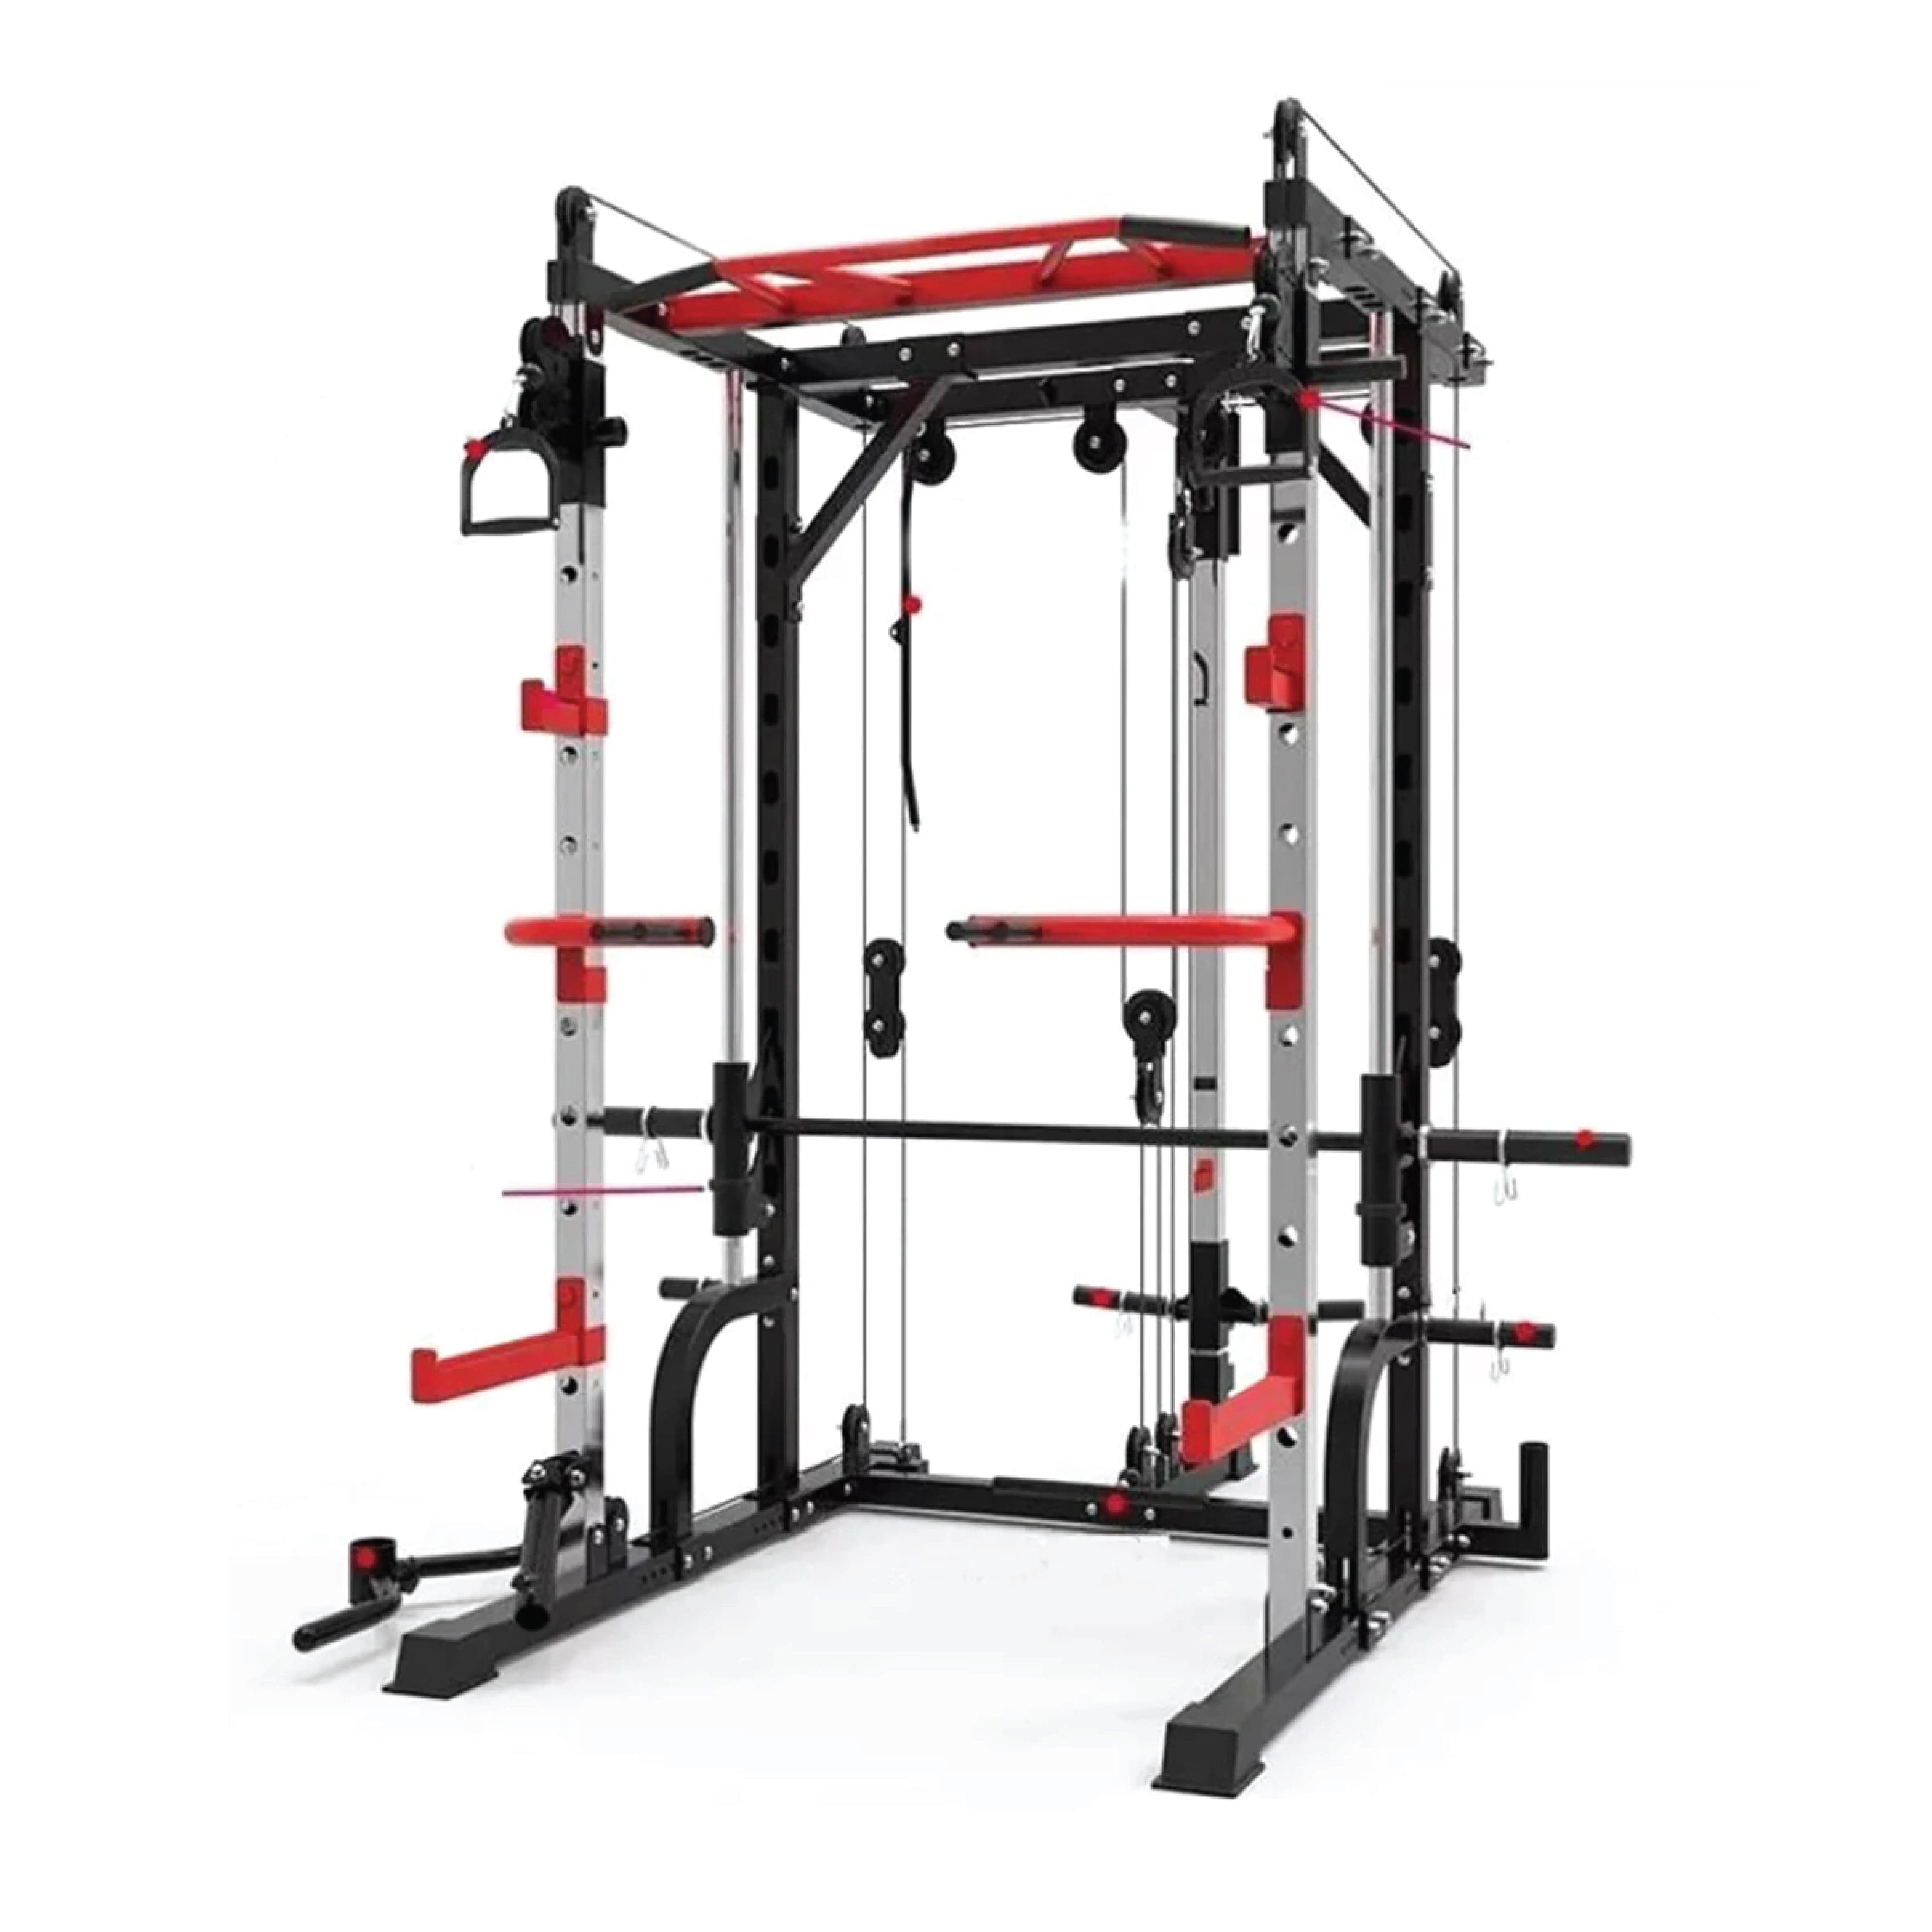 Combo Deal | 1441 Fitness Smith Machine With Functional Trainer And Squat Rack J009 + 80kg Apus Bumper Plates + Adjustable Bench A8007 + 15 MM Flooring - Athletix.ae